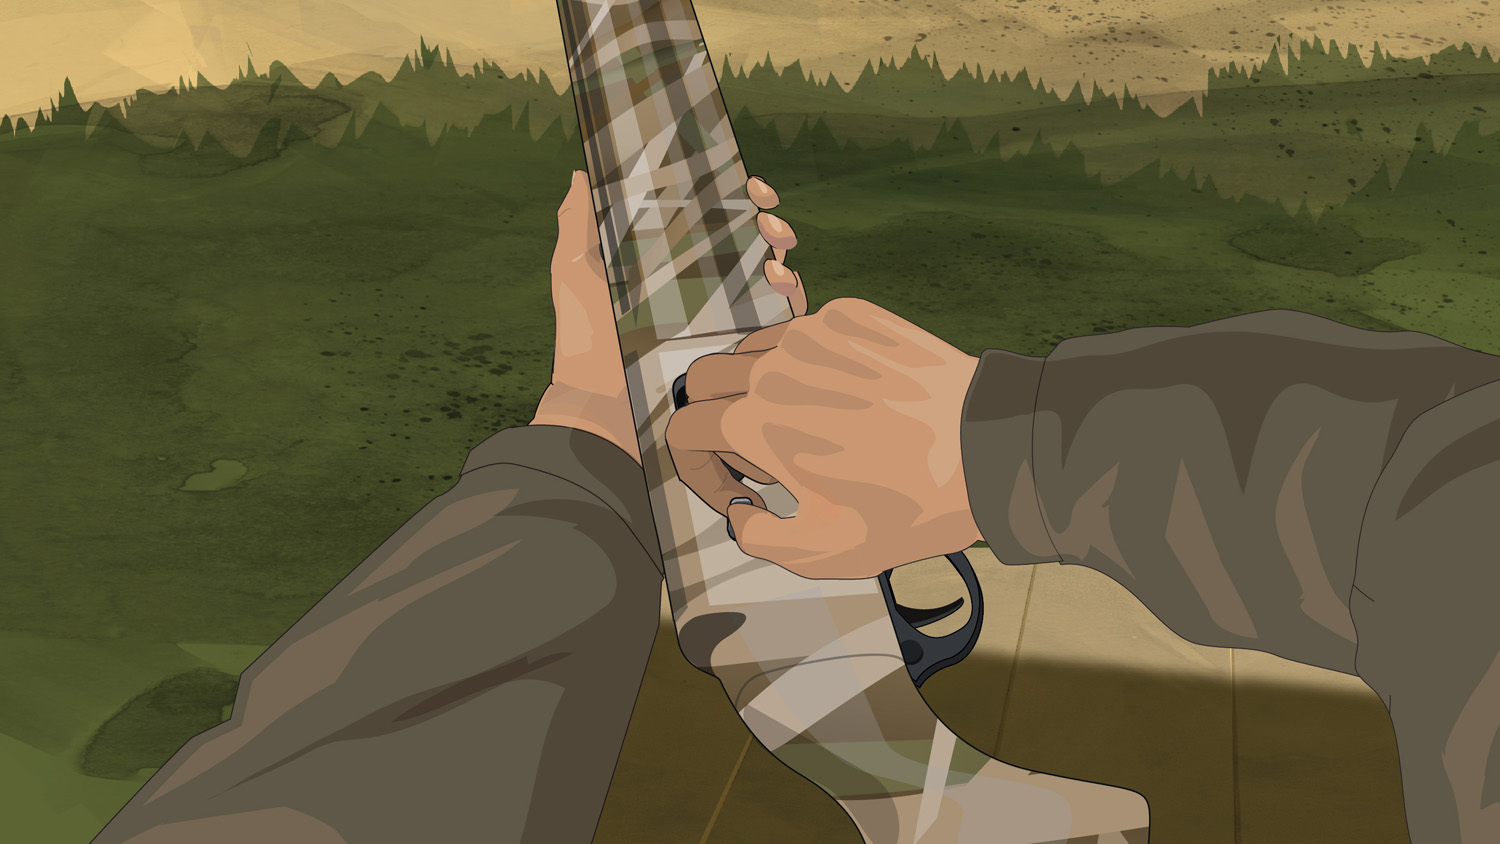 Illustration of a hunter's hands opening the action of a semi-automatic action shotgun.